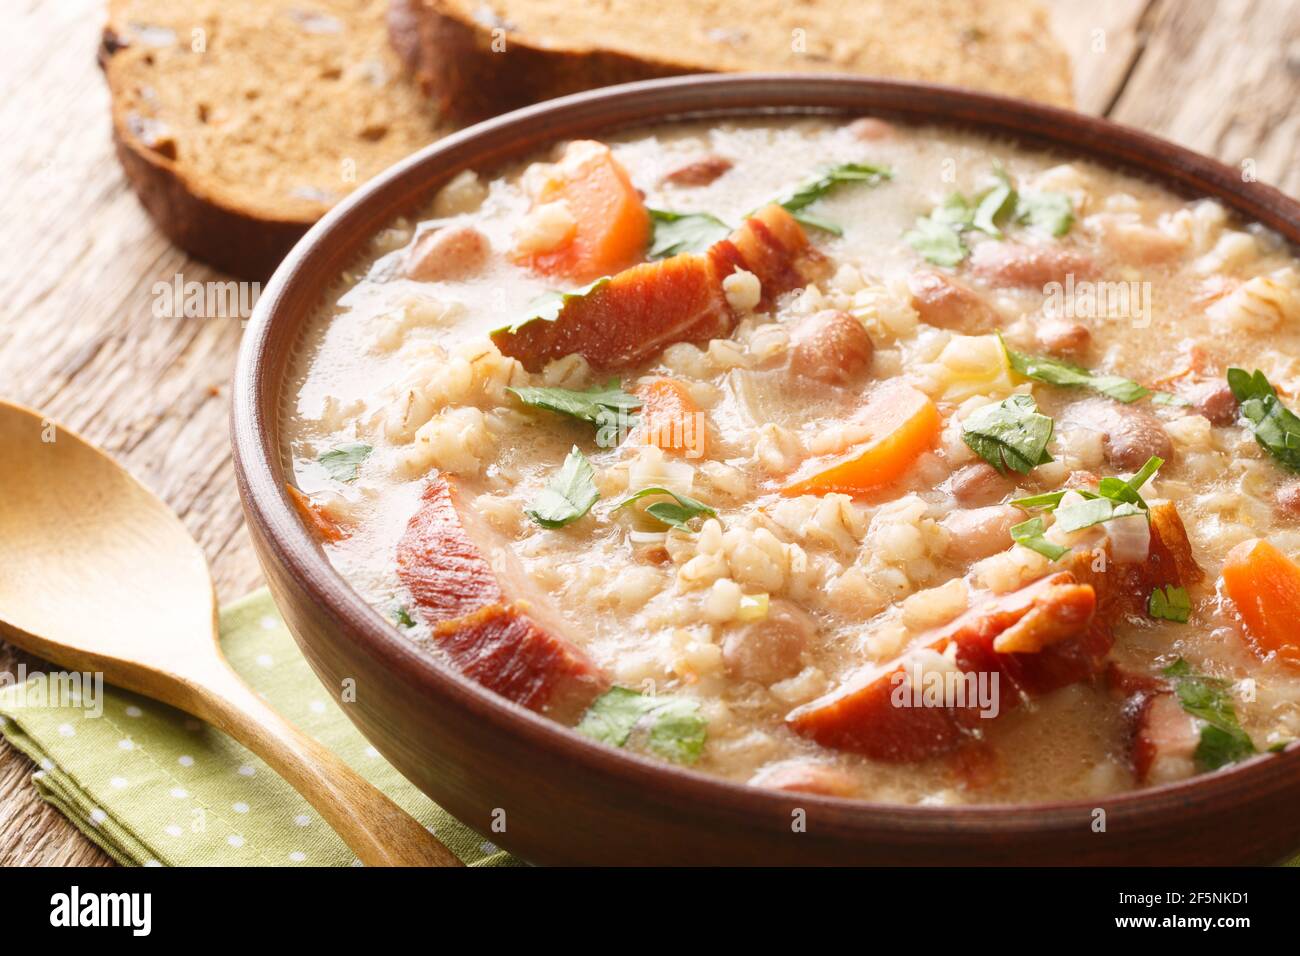 Thick rich barley and bean soup with smoked meat and vegetables close-up in a bowl on the table. horizontal Stock Photo